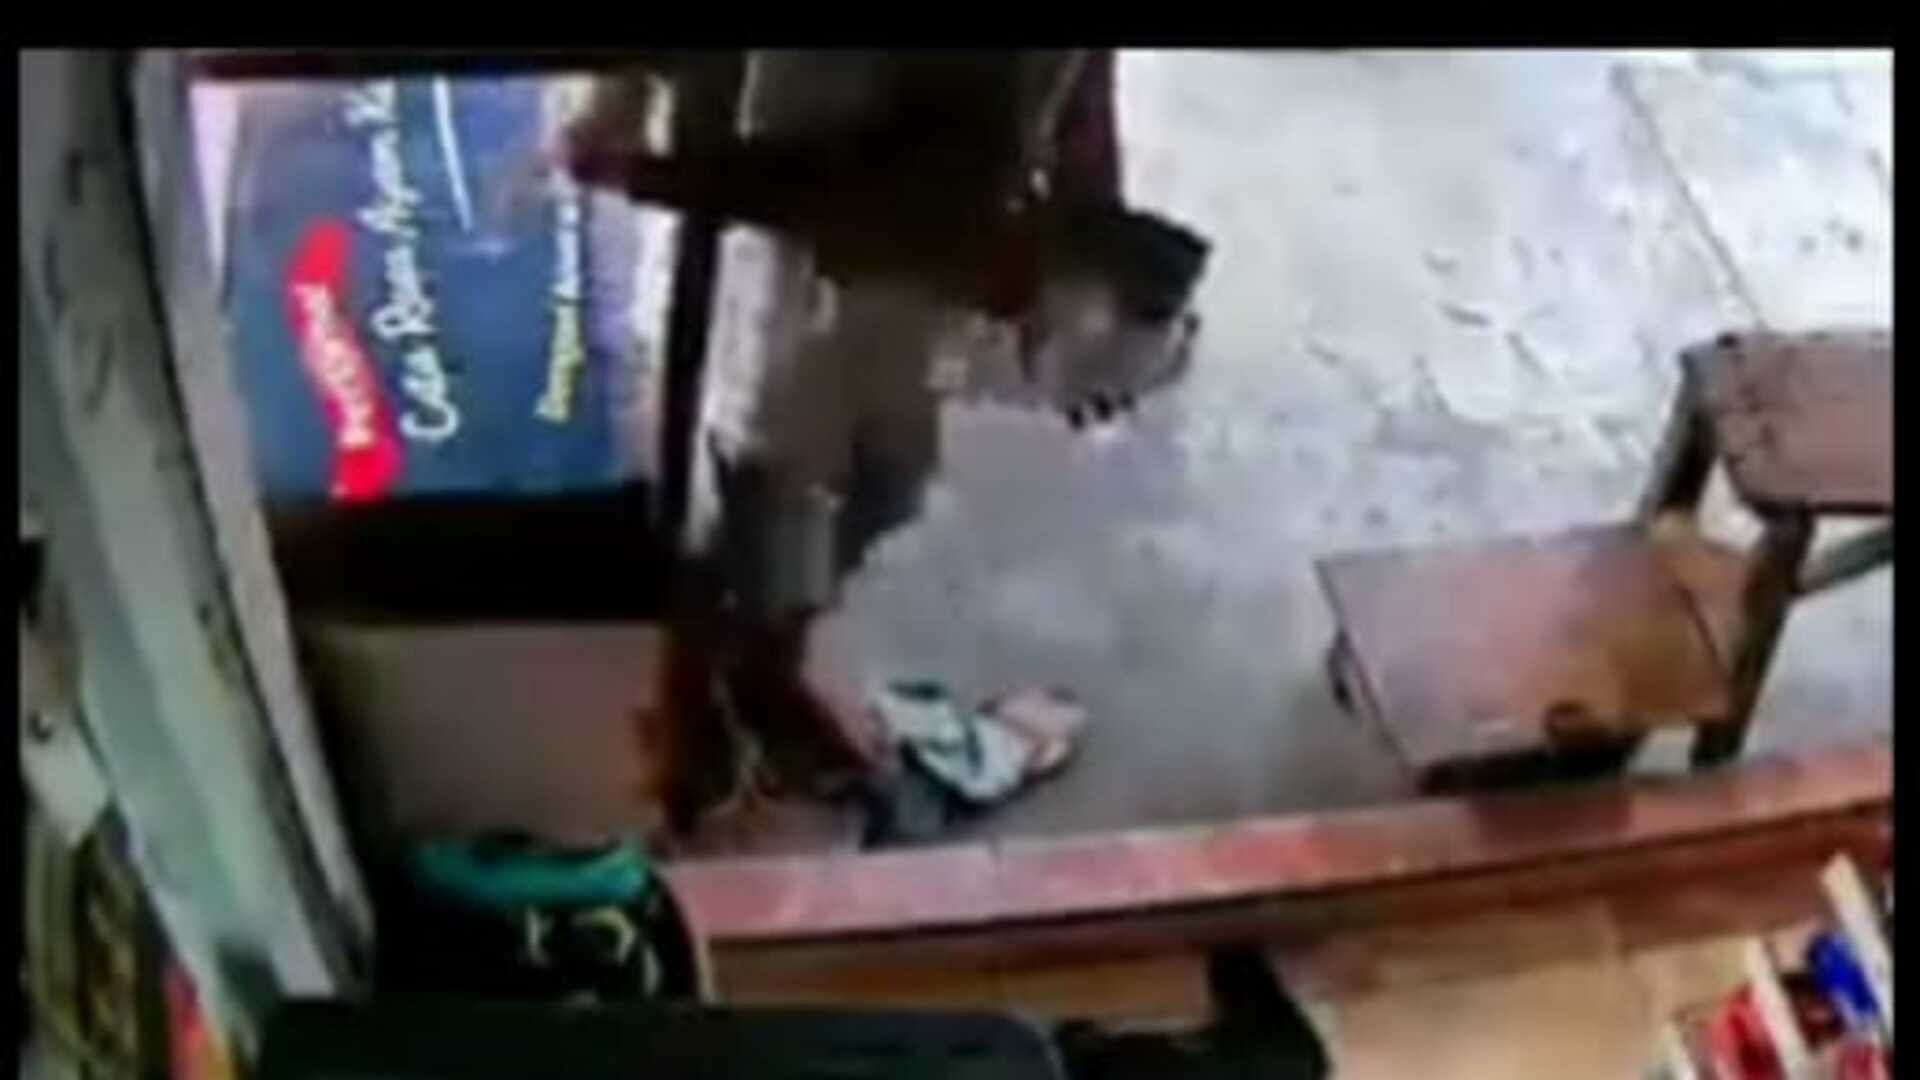 The thiefs idea of stealing slippers cctv footage goes viral on social media